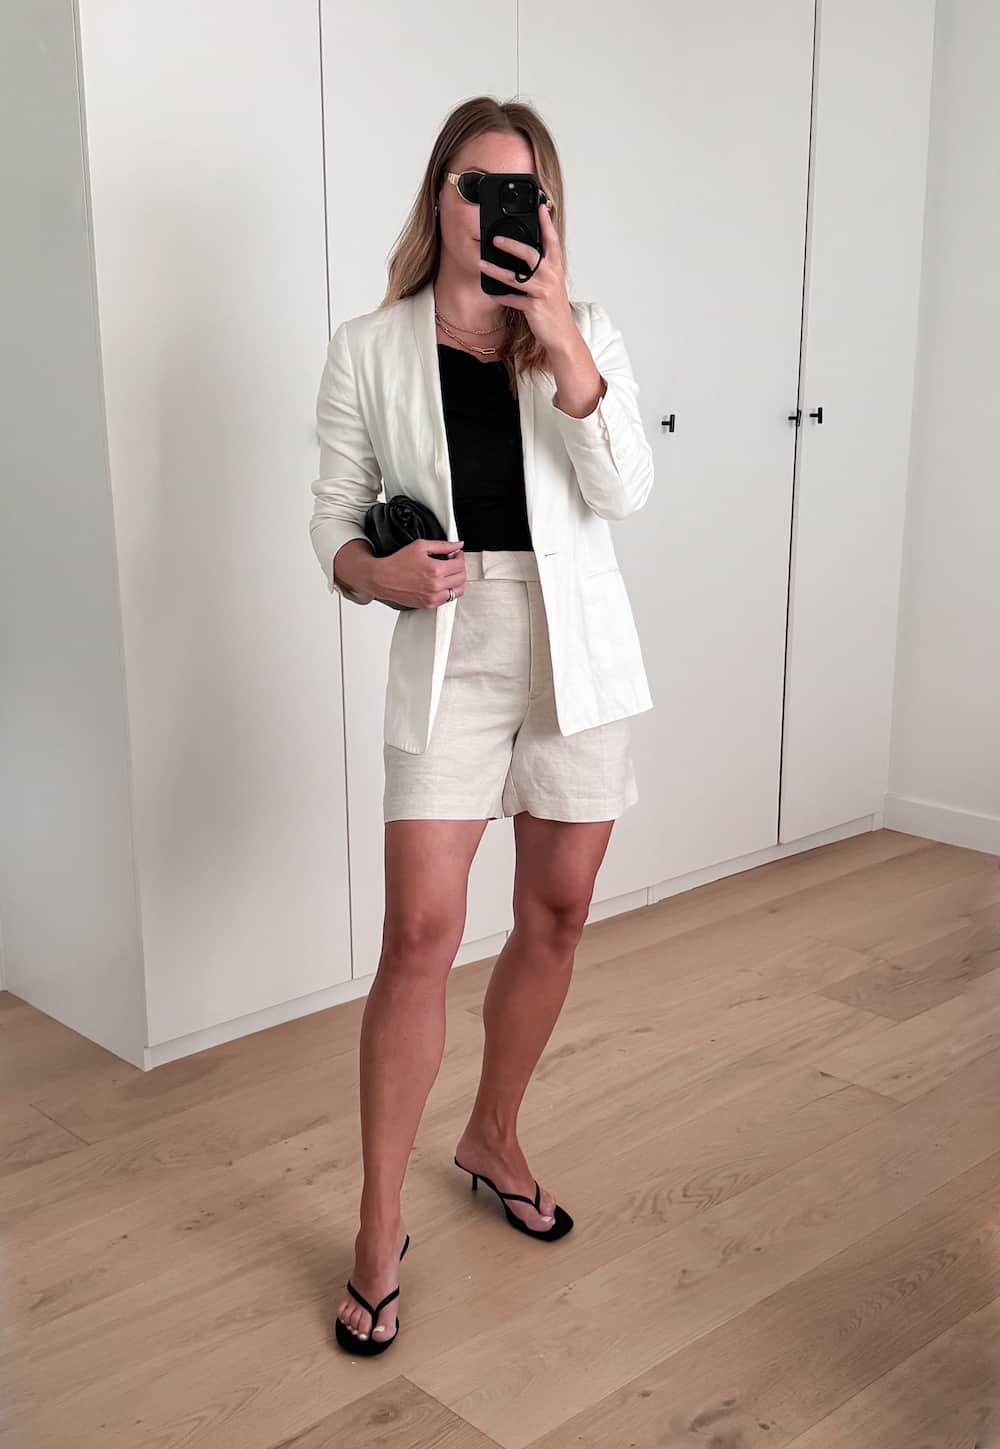 Christal wearing cream shorts, a black knit top, a white blazer and black heeled sandals.